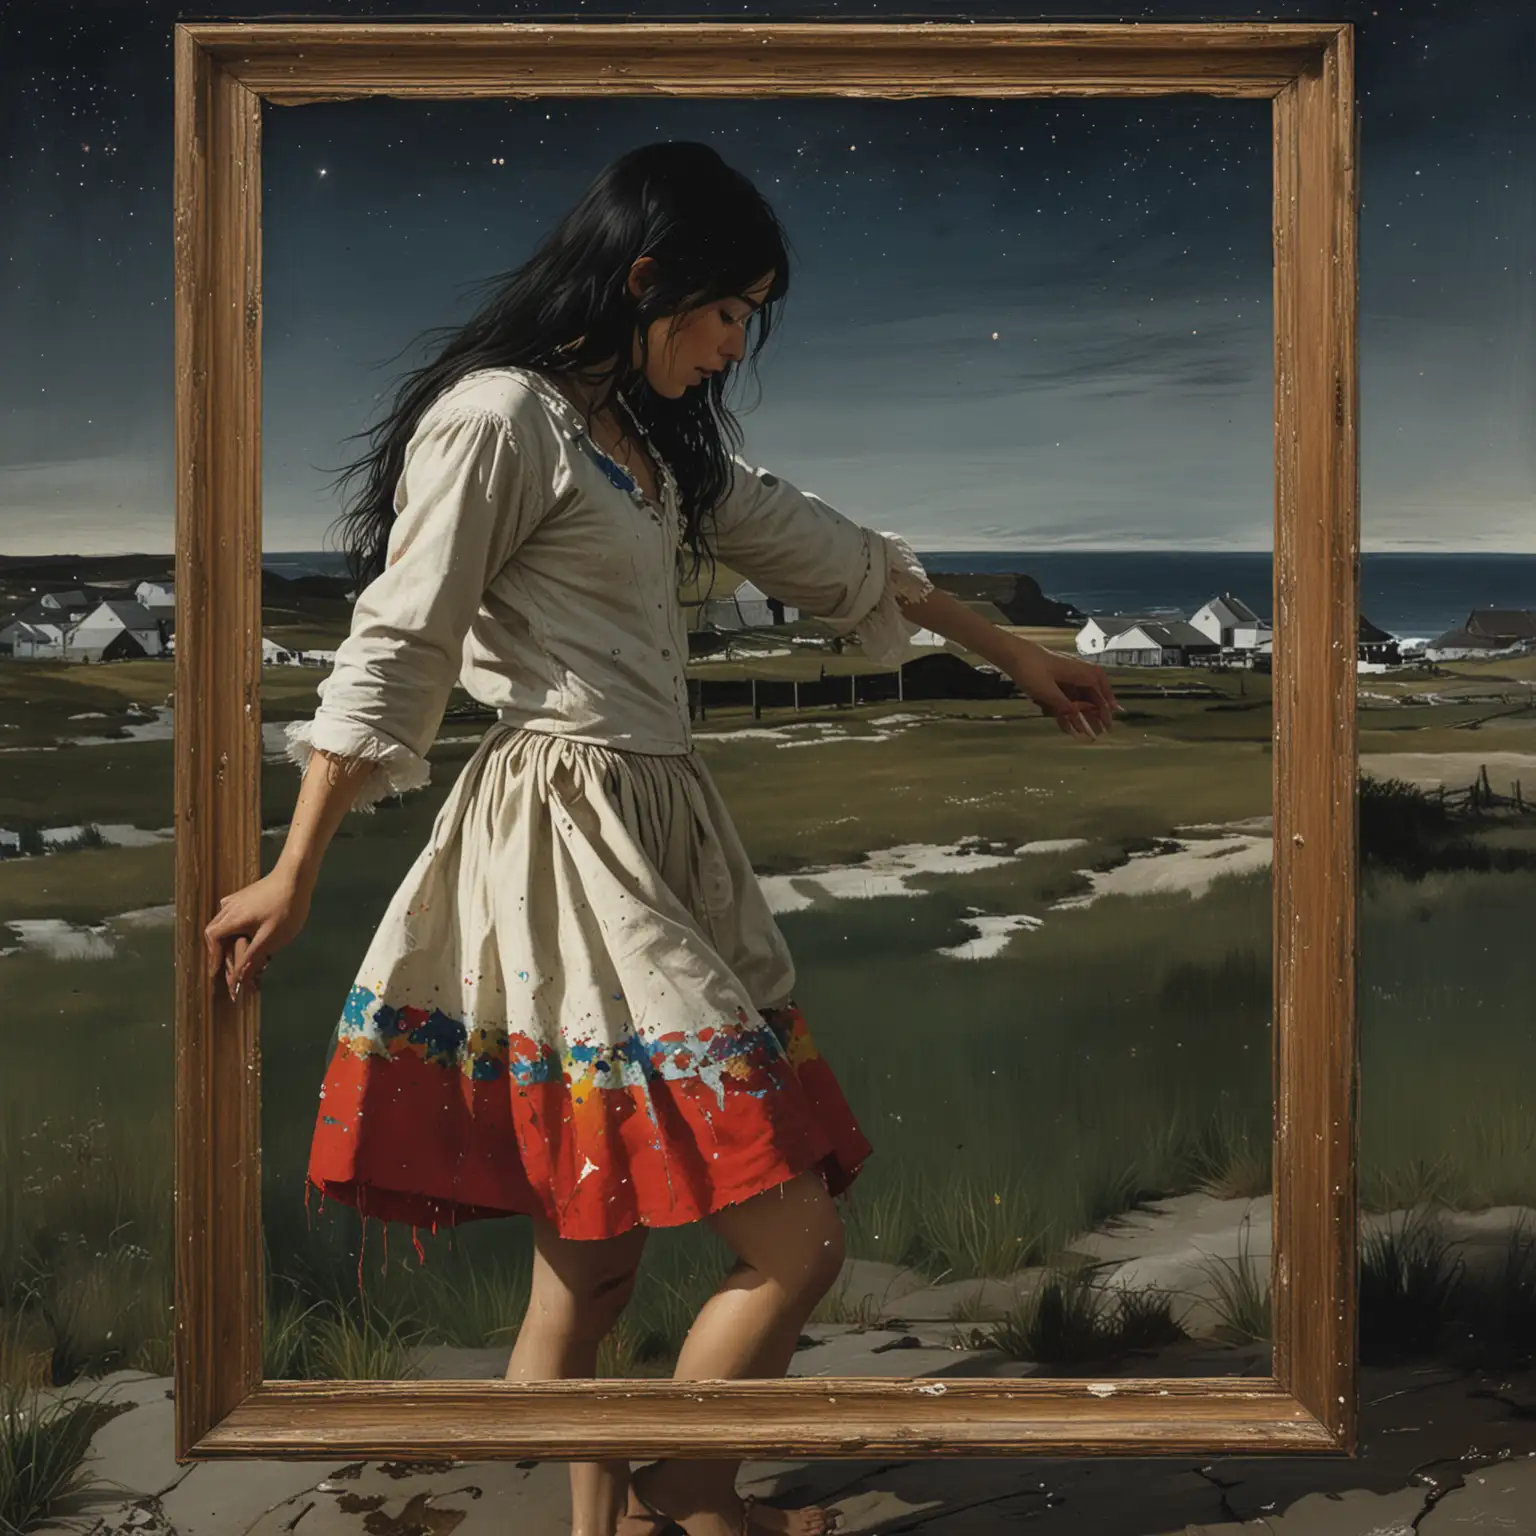 Painting by Andrew Wyeth, bird's eye view, side profile view, in a wooden frame, a young eskimo woman, with long black hair and bangs, in a vivid colorful many-colored mid-thigh skirt, with paint dripping off her skirt onto her legs and blouse and the frame, dancing, at night under the stars, on a farm nearby the coast of oregon